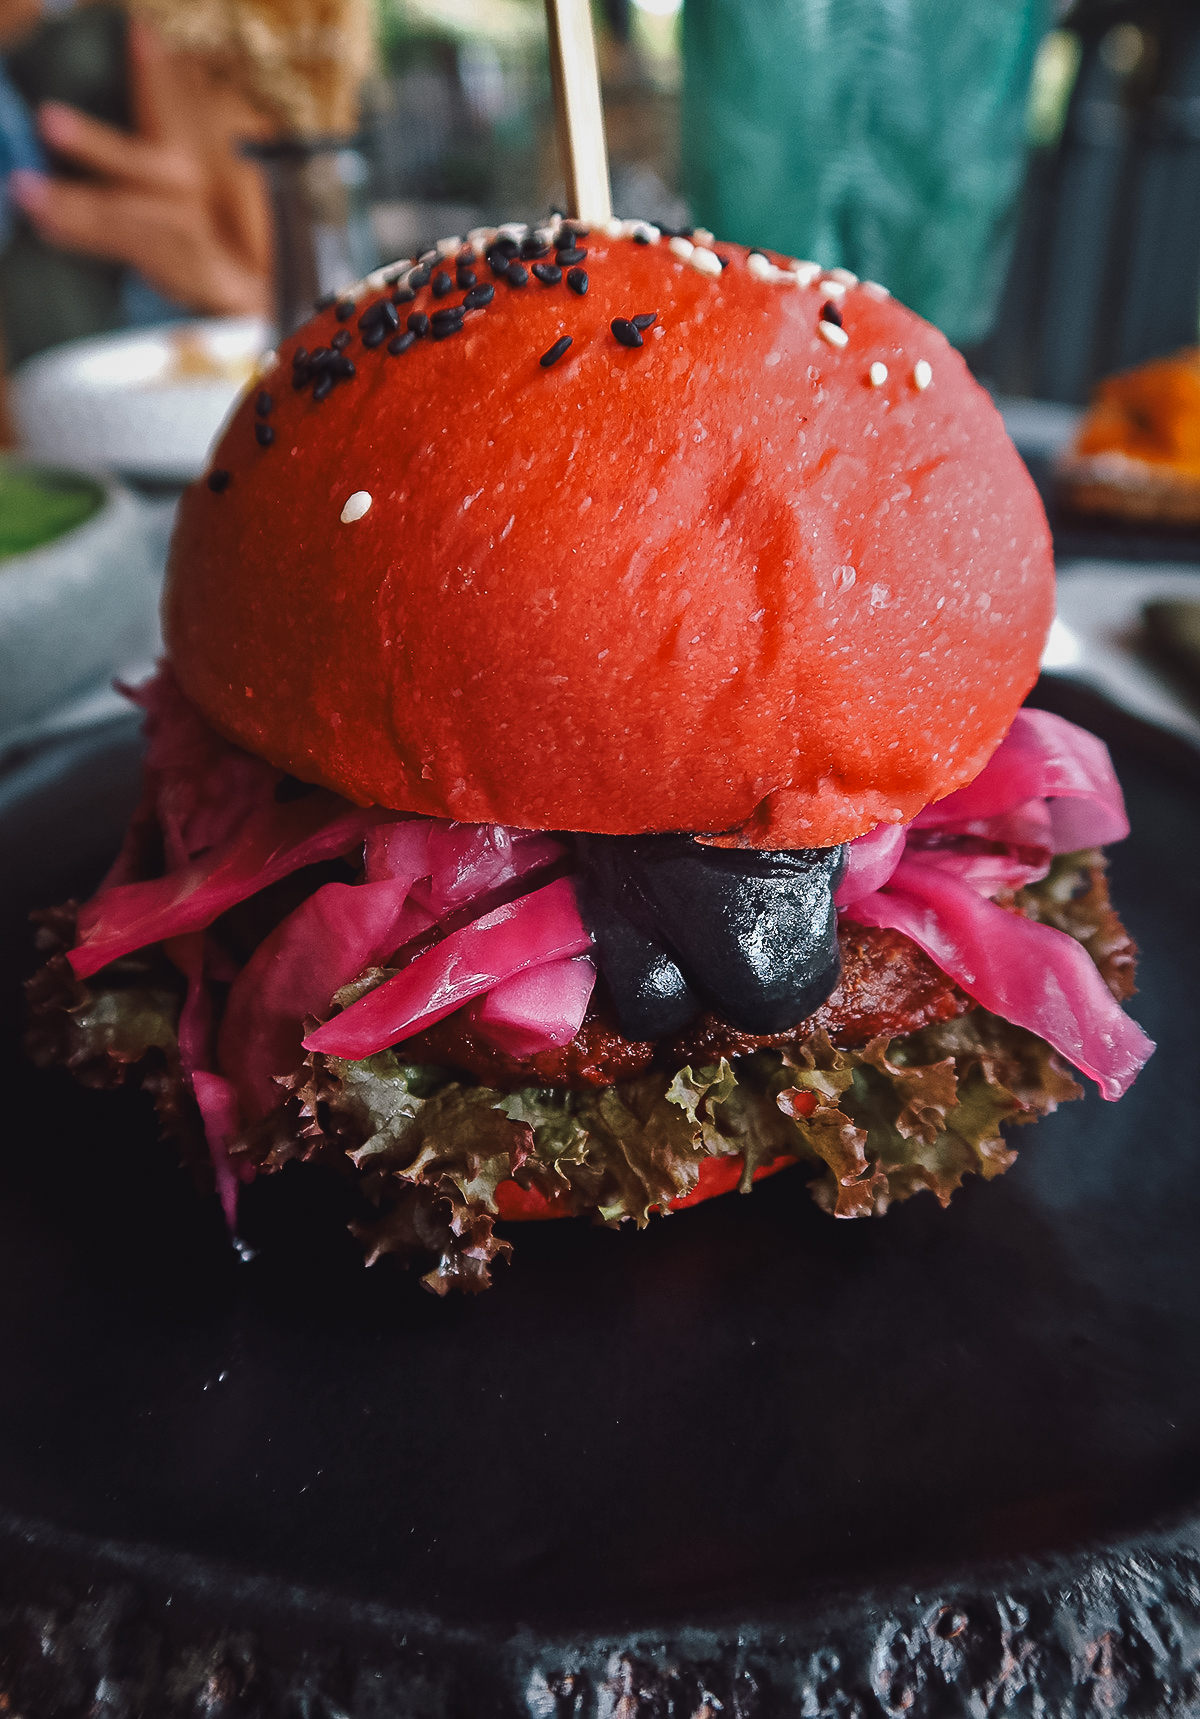 Beetroot burger at a restaurant in Ubud